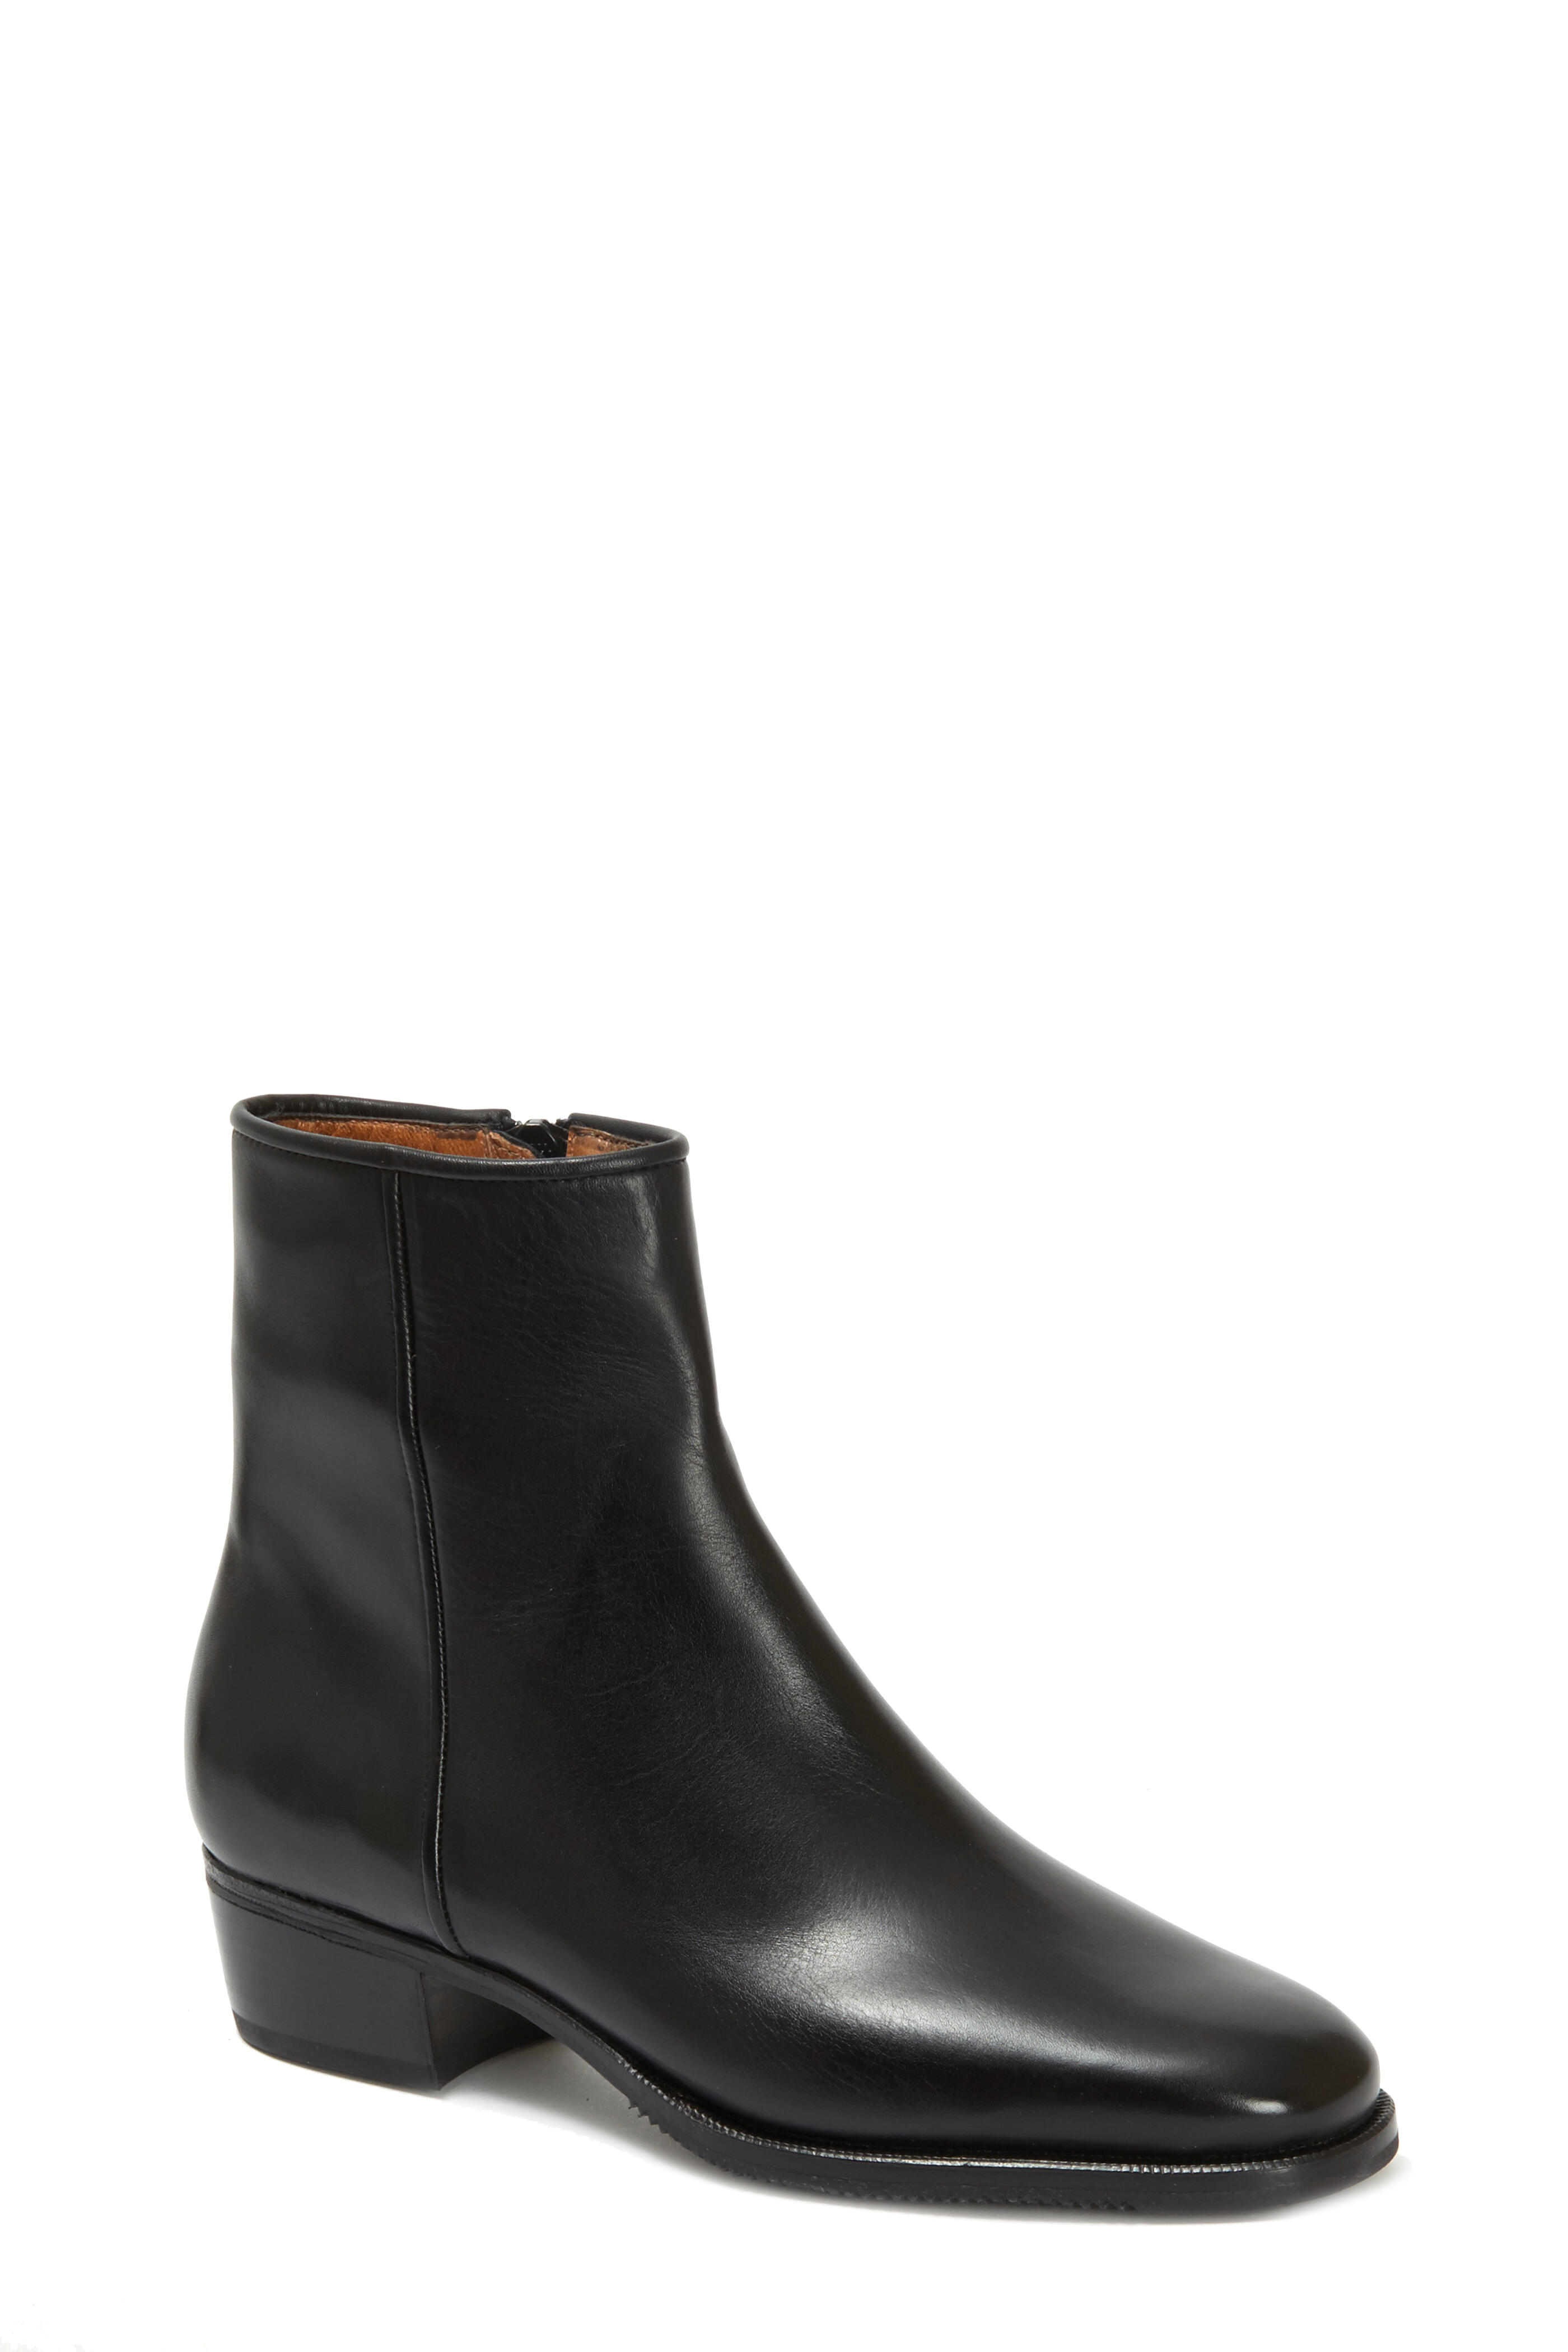 Gravati - Black Leather Ankle Boot, 35mm | Mitchell Stores